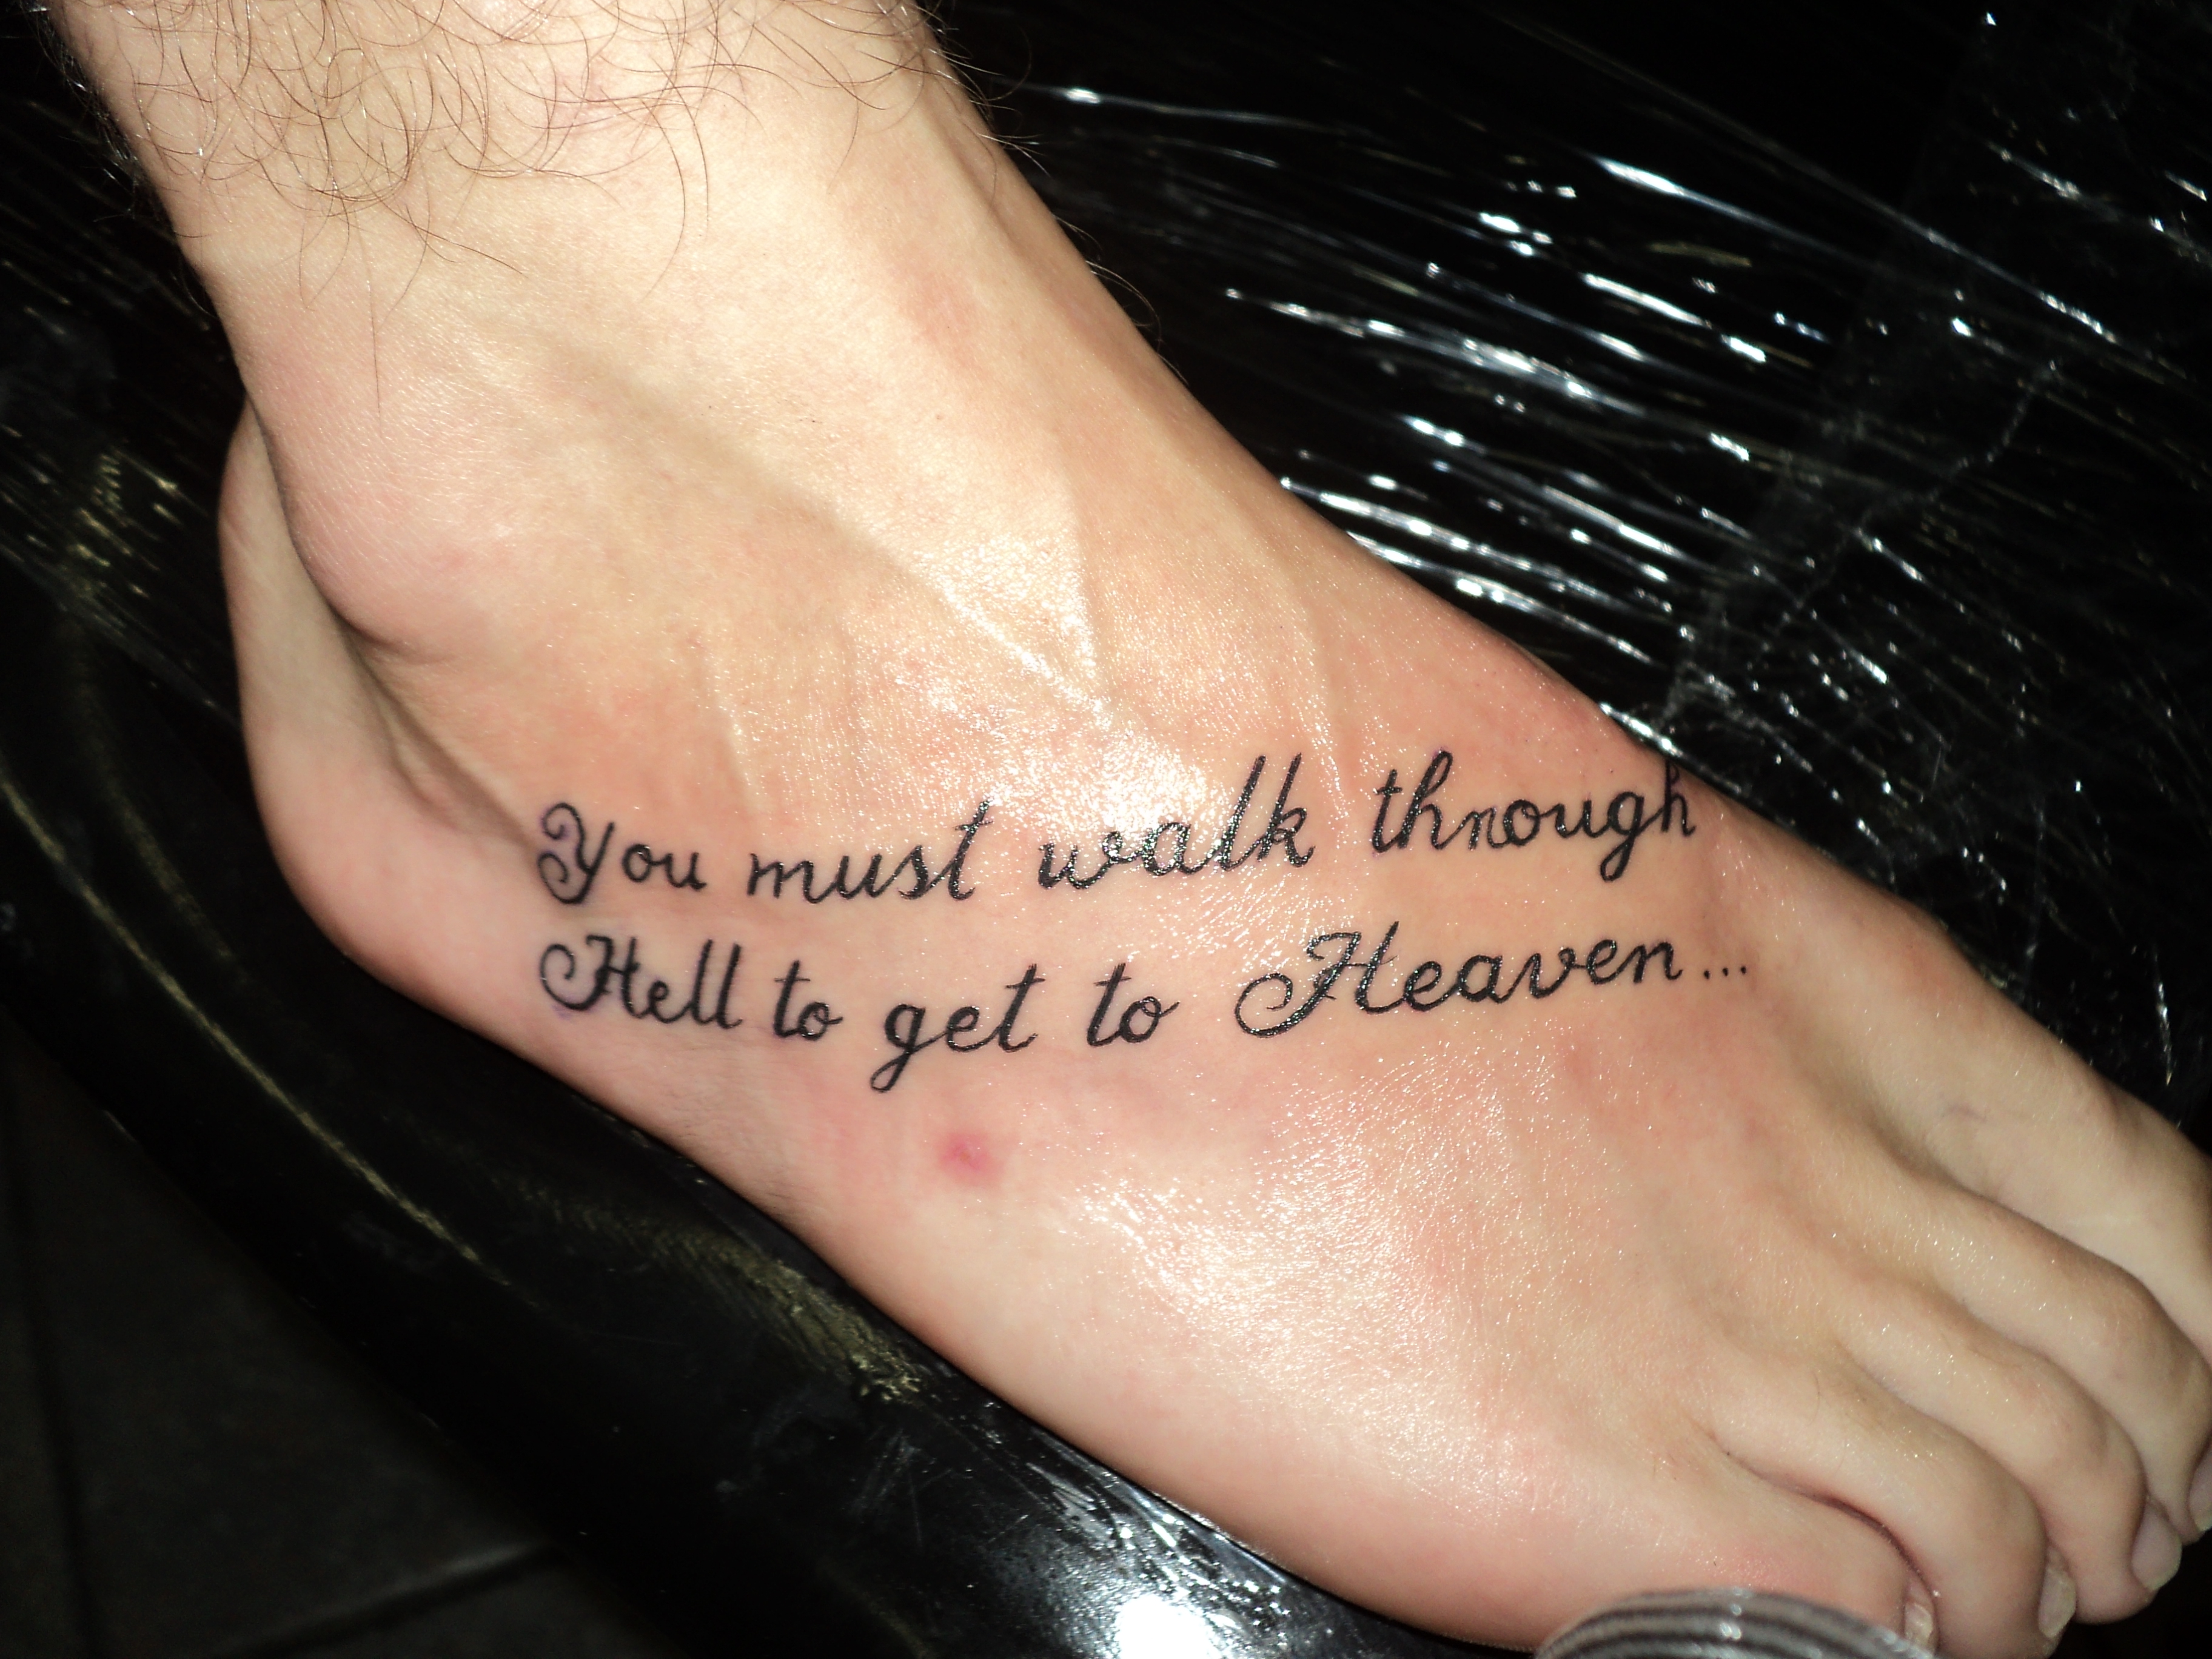  Quote Tattoos  Designs Ideas and Meaning Tattoos  For You